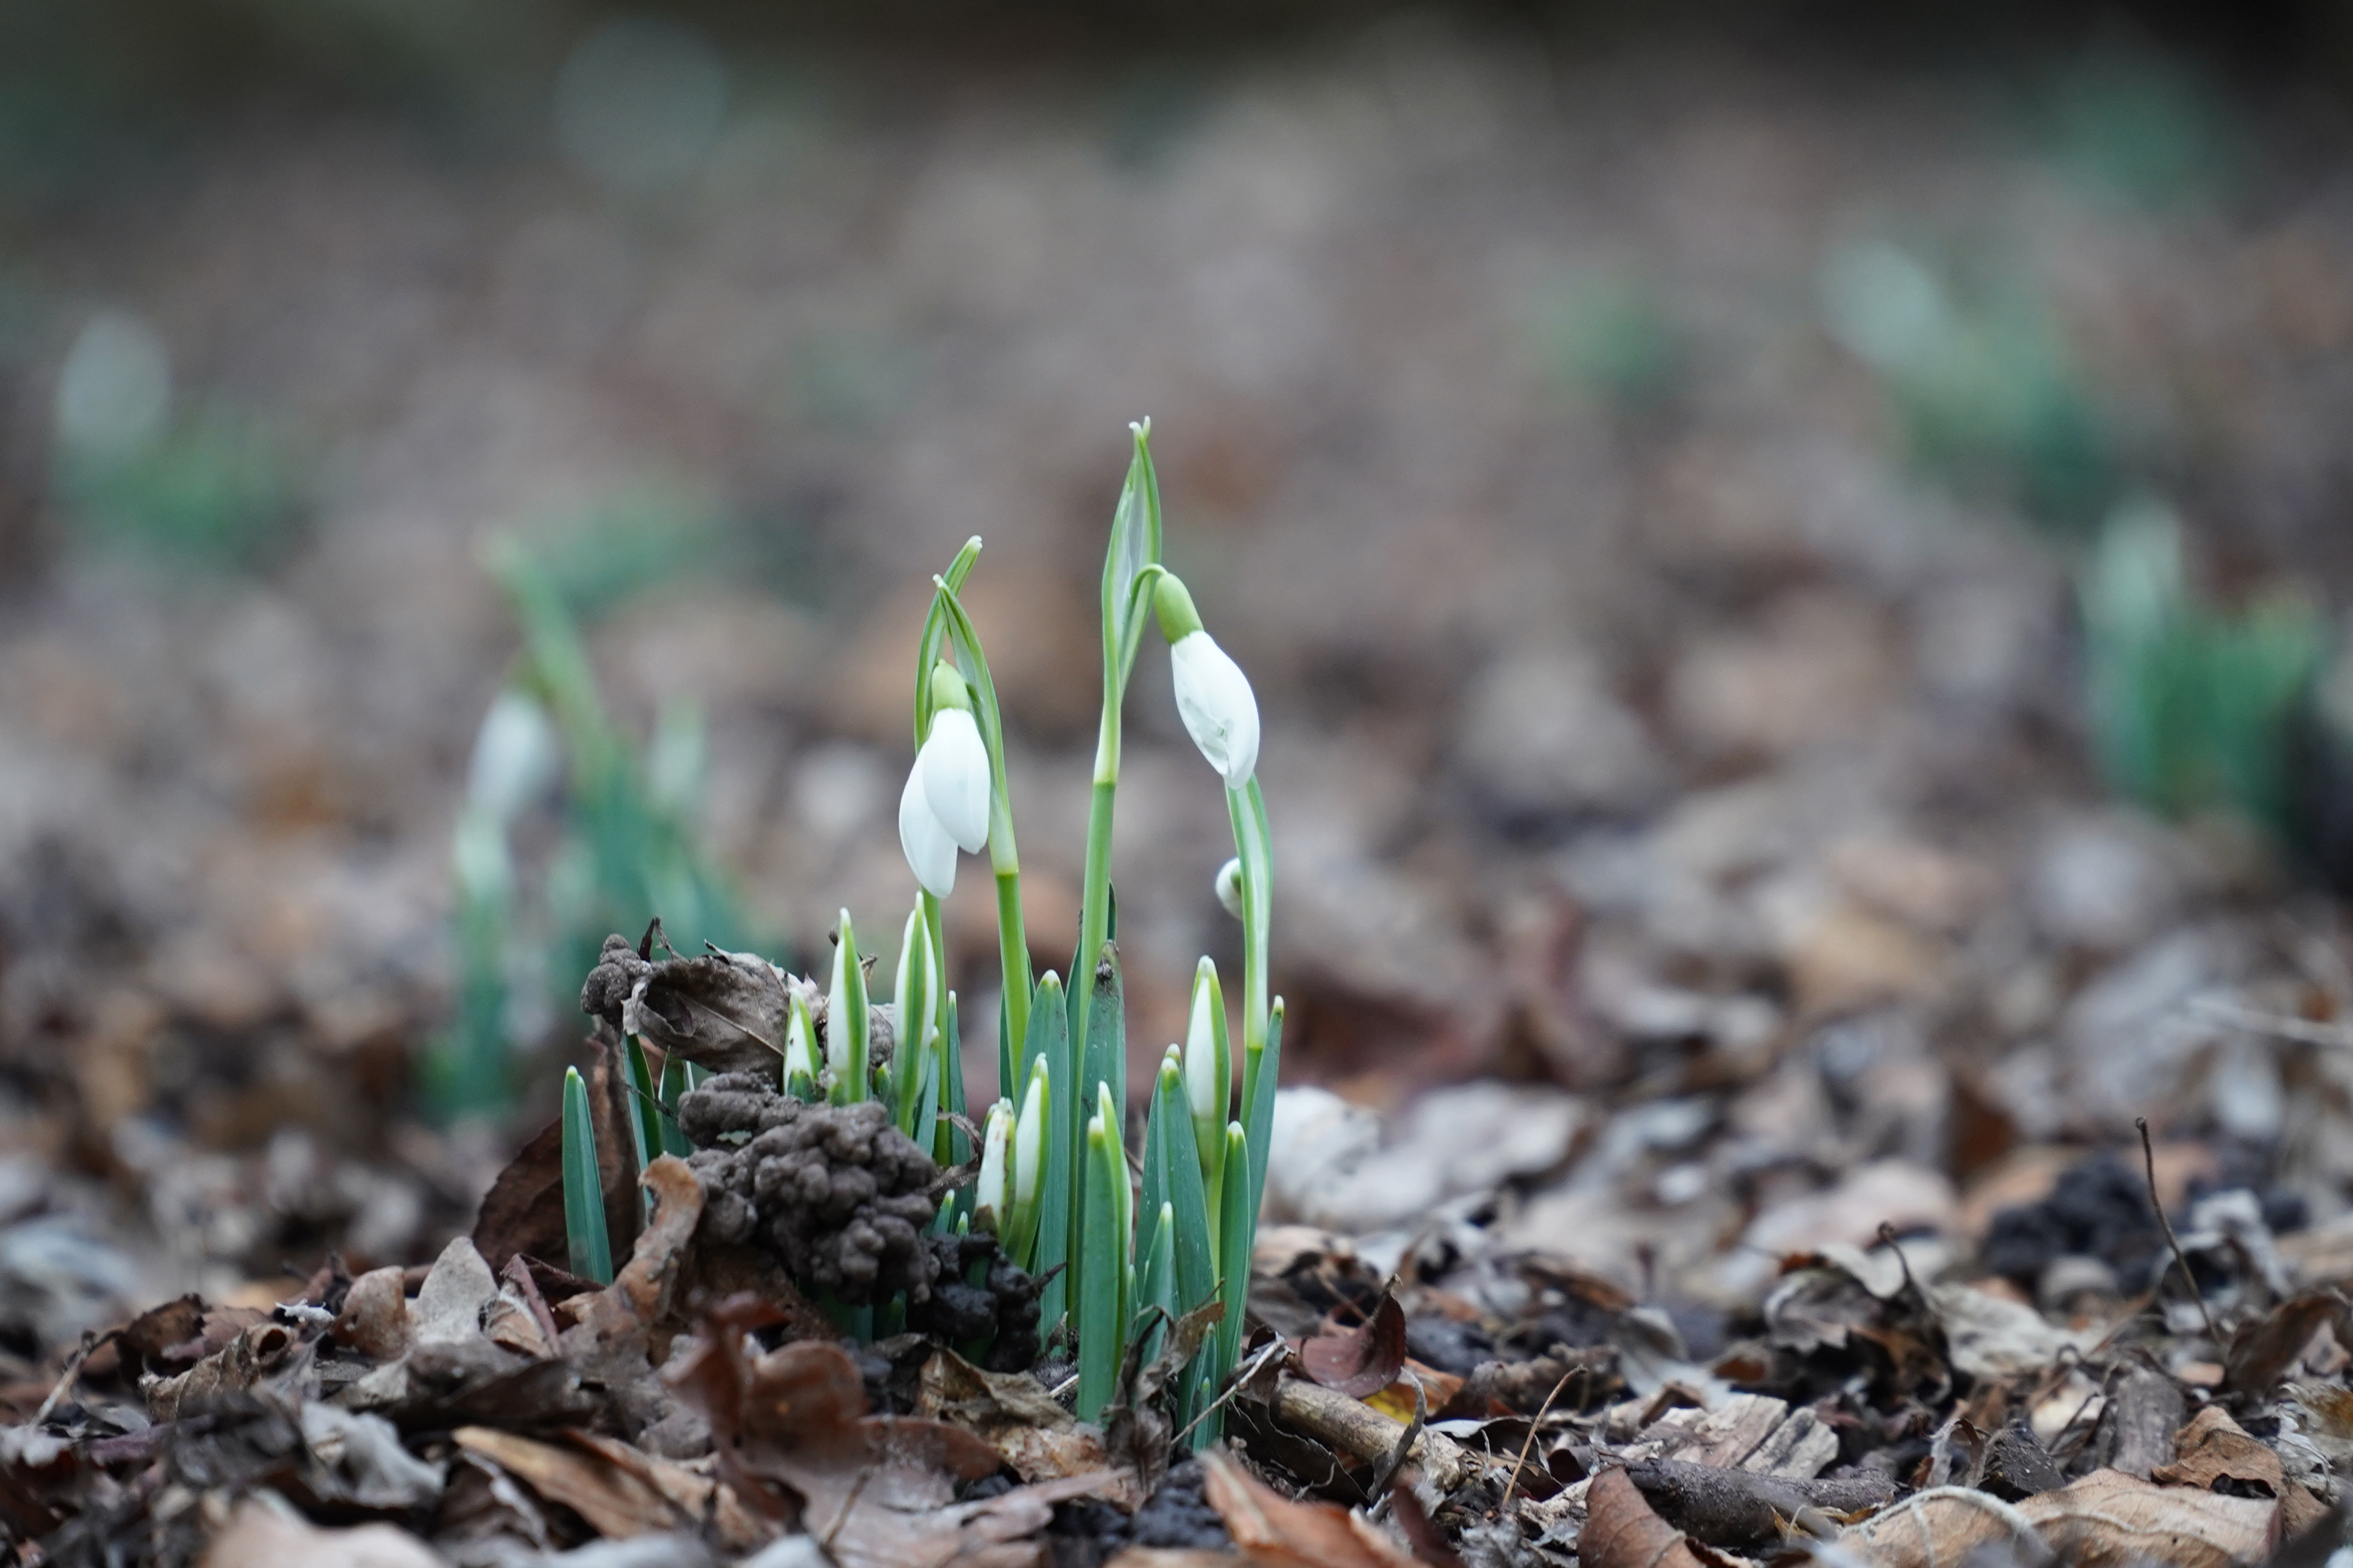 Snowdrops emerge at Timber Hill (National Garden Scheme/PA)